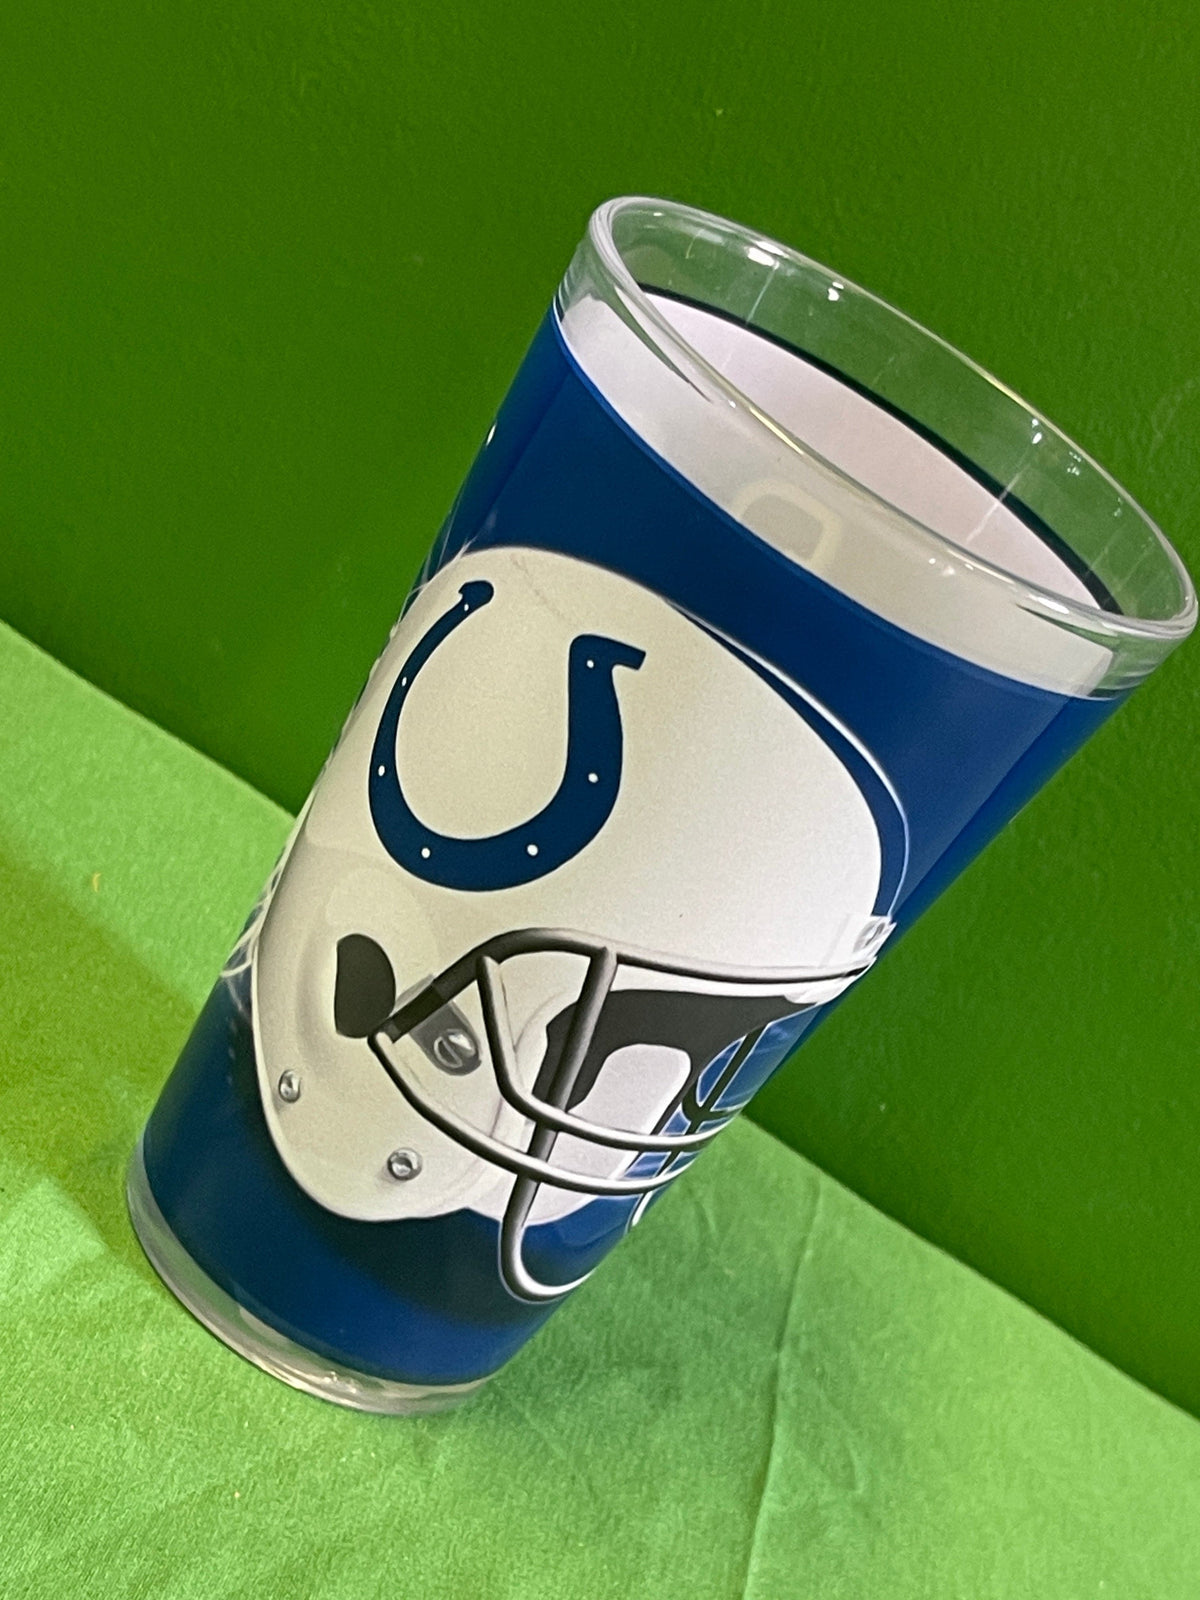 NFL Indianapolis Colts Licensed 16 oz Pint Glass/Tumbler NWT